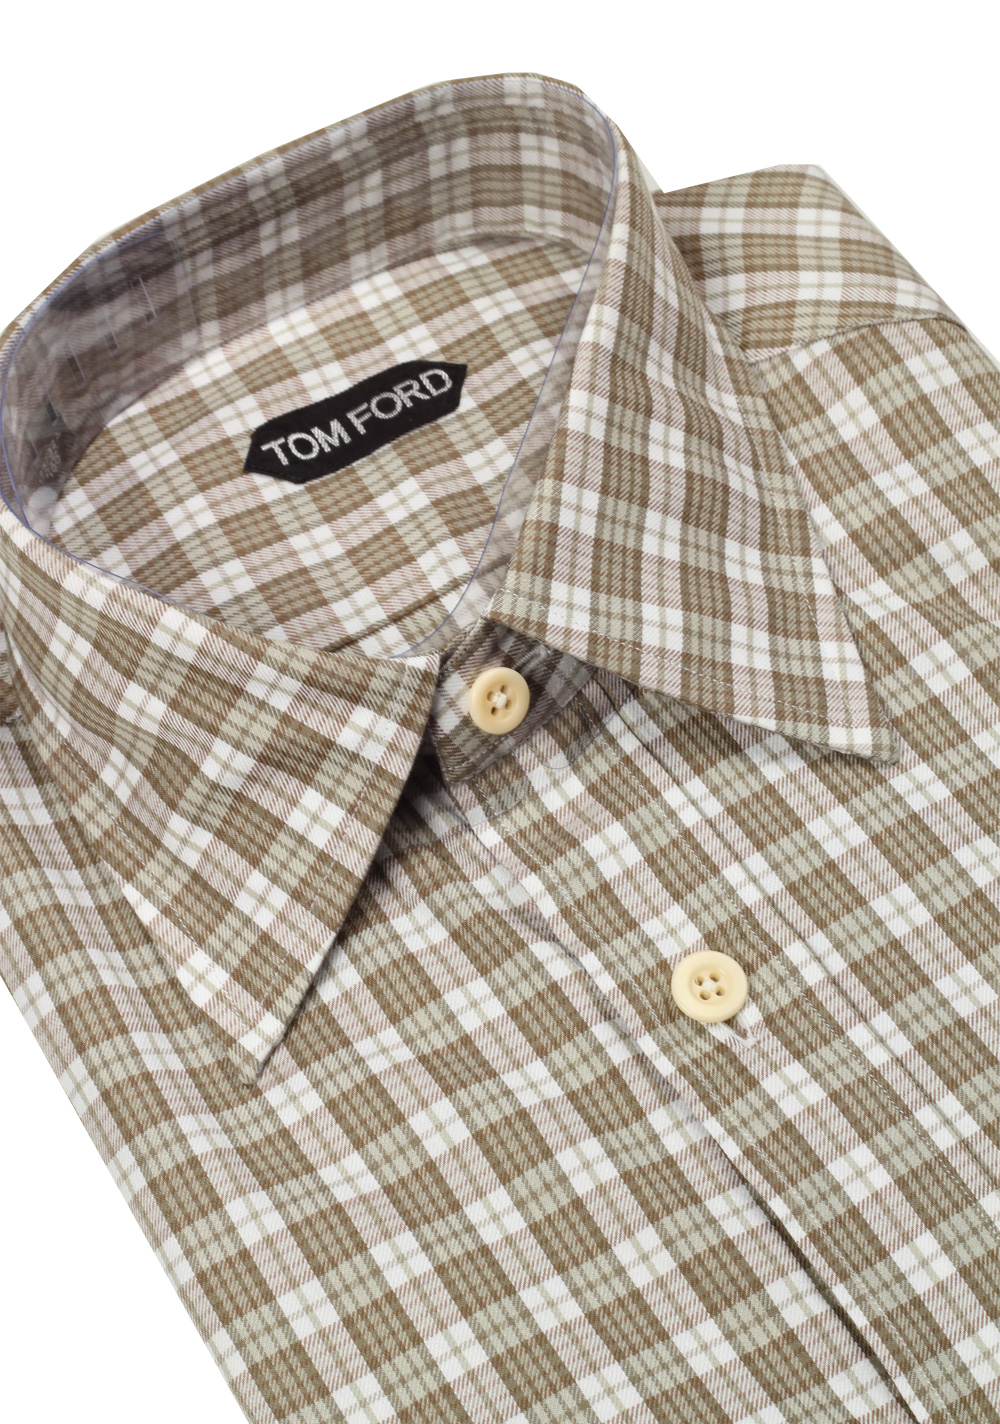 TOM FORD Checked Brown Dress Shirt Size 40 / 15,75 U.S. | Costume Limité